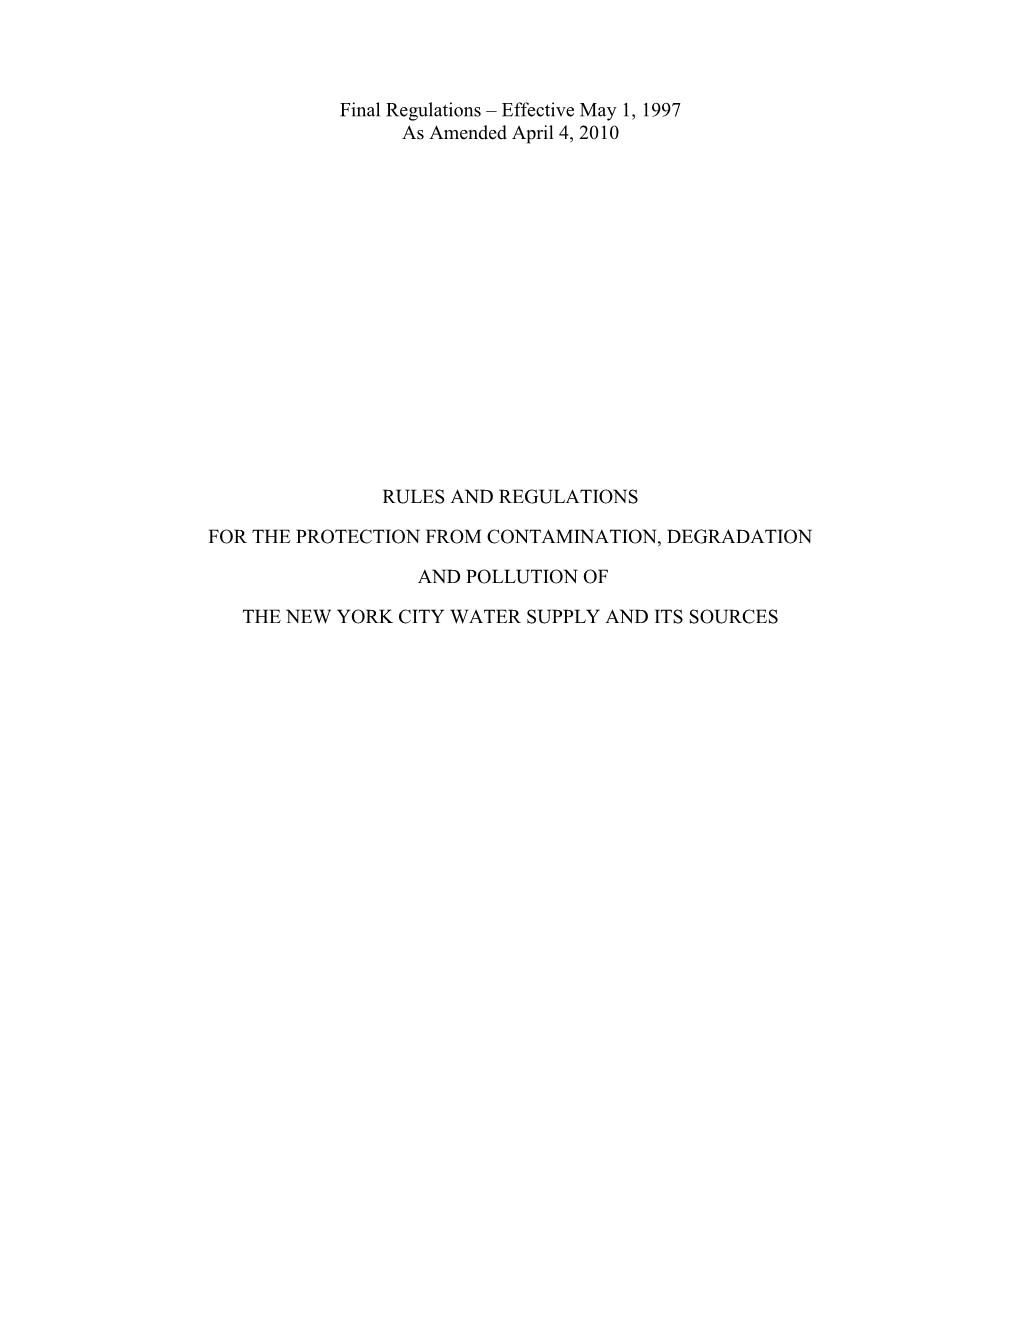 New York City Watershed Rules and Regulations